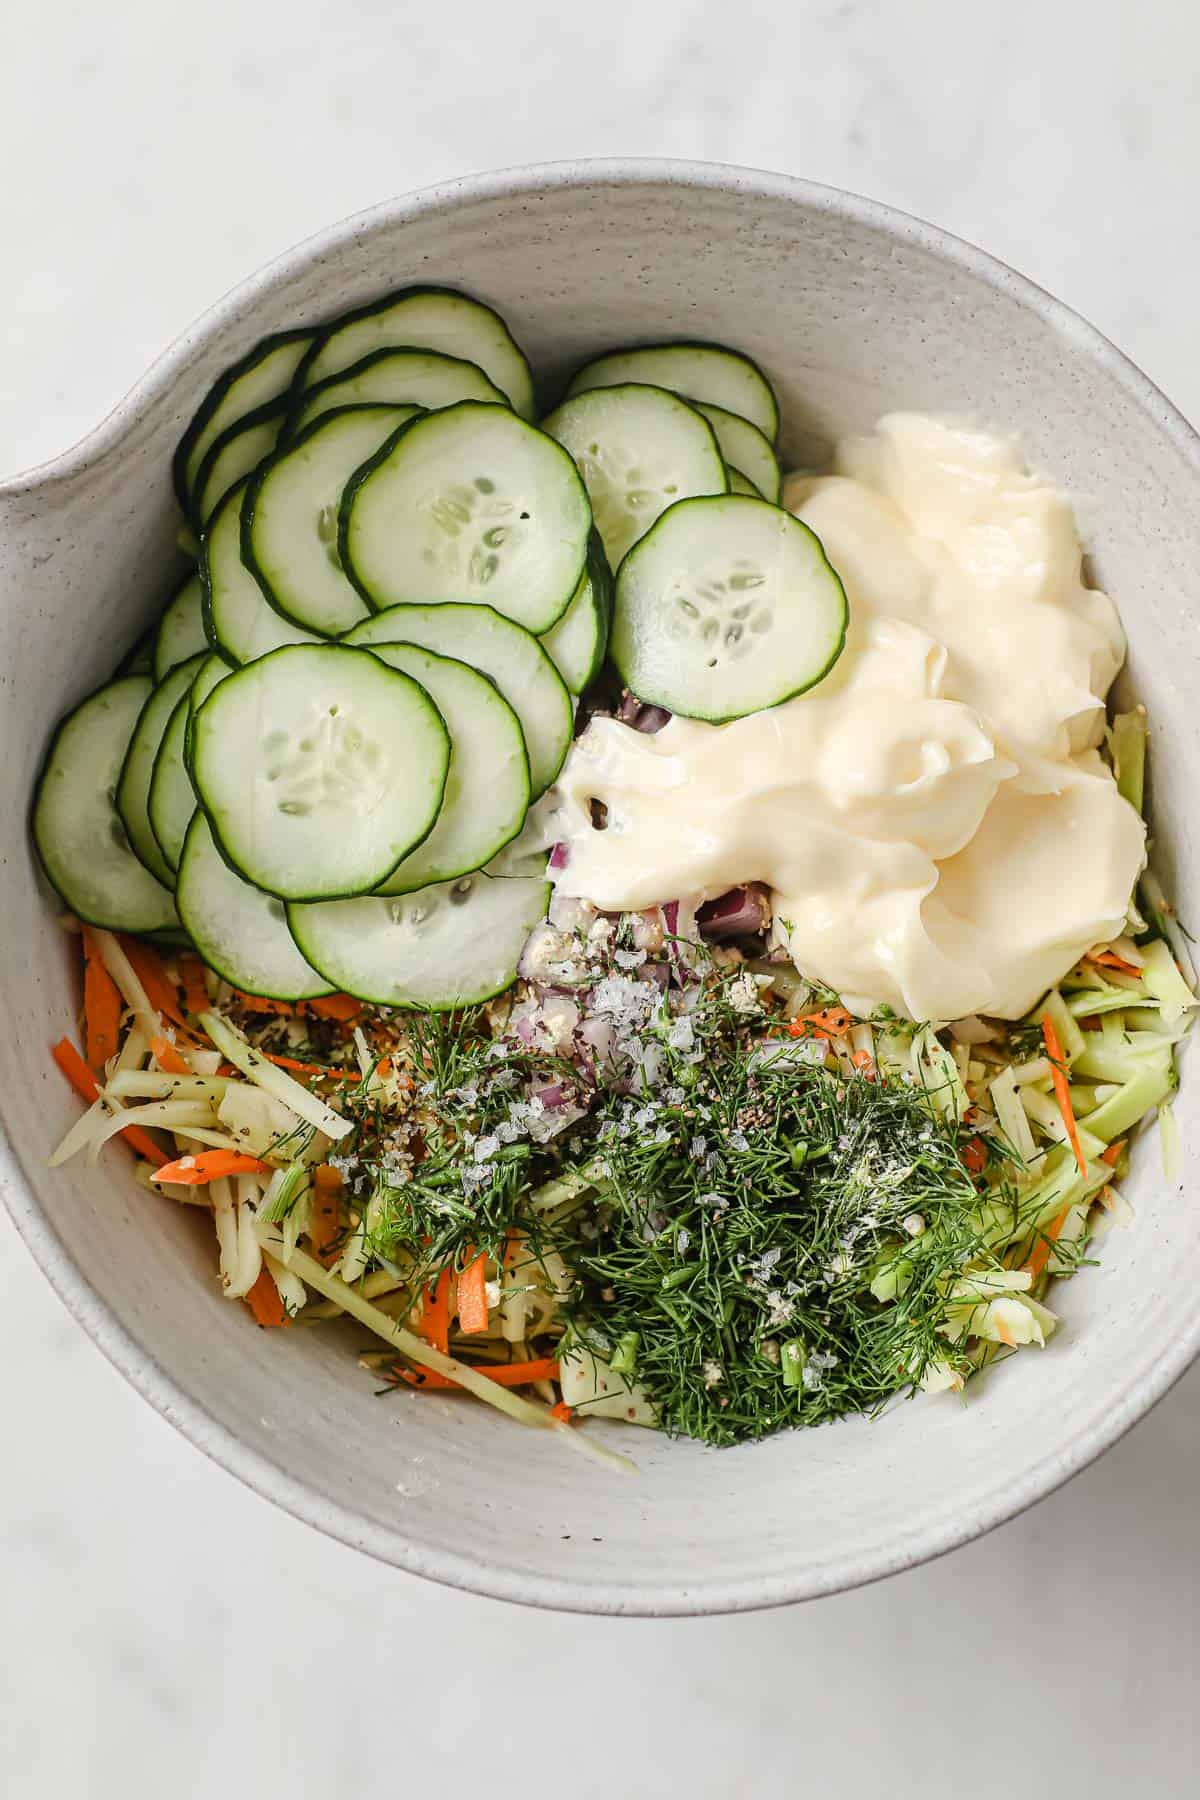 Ingredients for keto coleslaw in a mixing bowl - broccoli slaw, cucumbers, mayo, vinegar, dill, garlic, salt and pepper